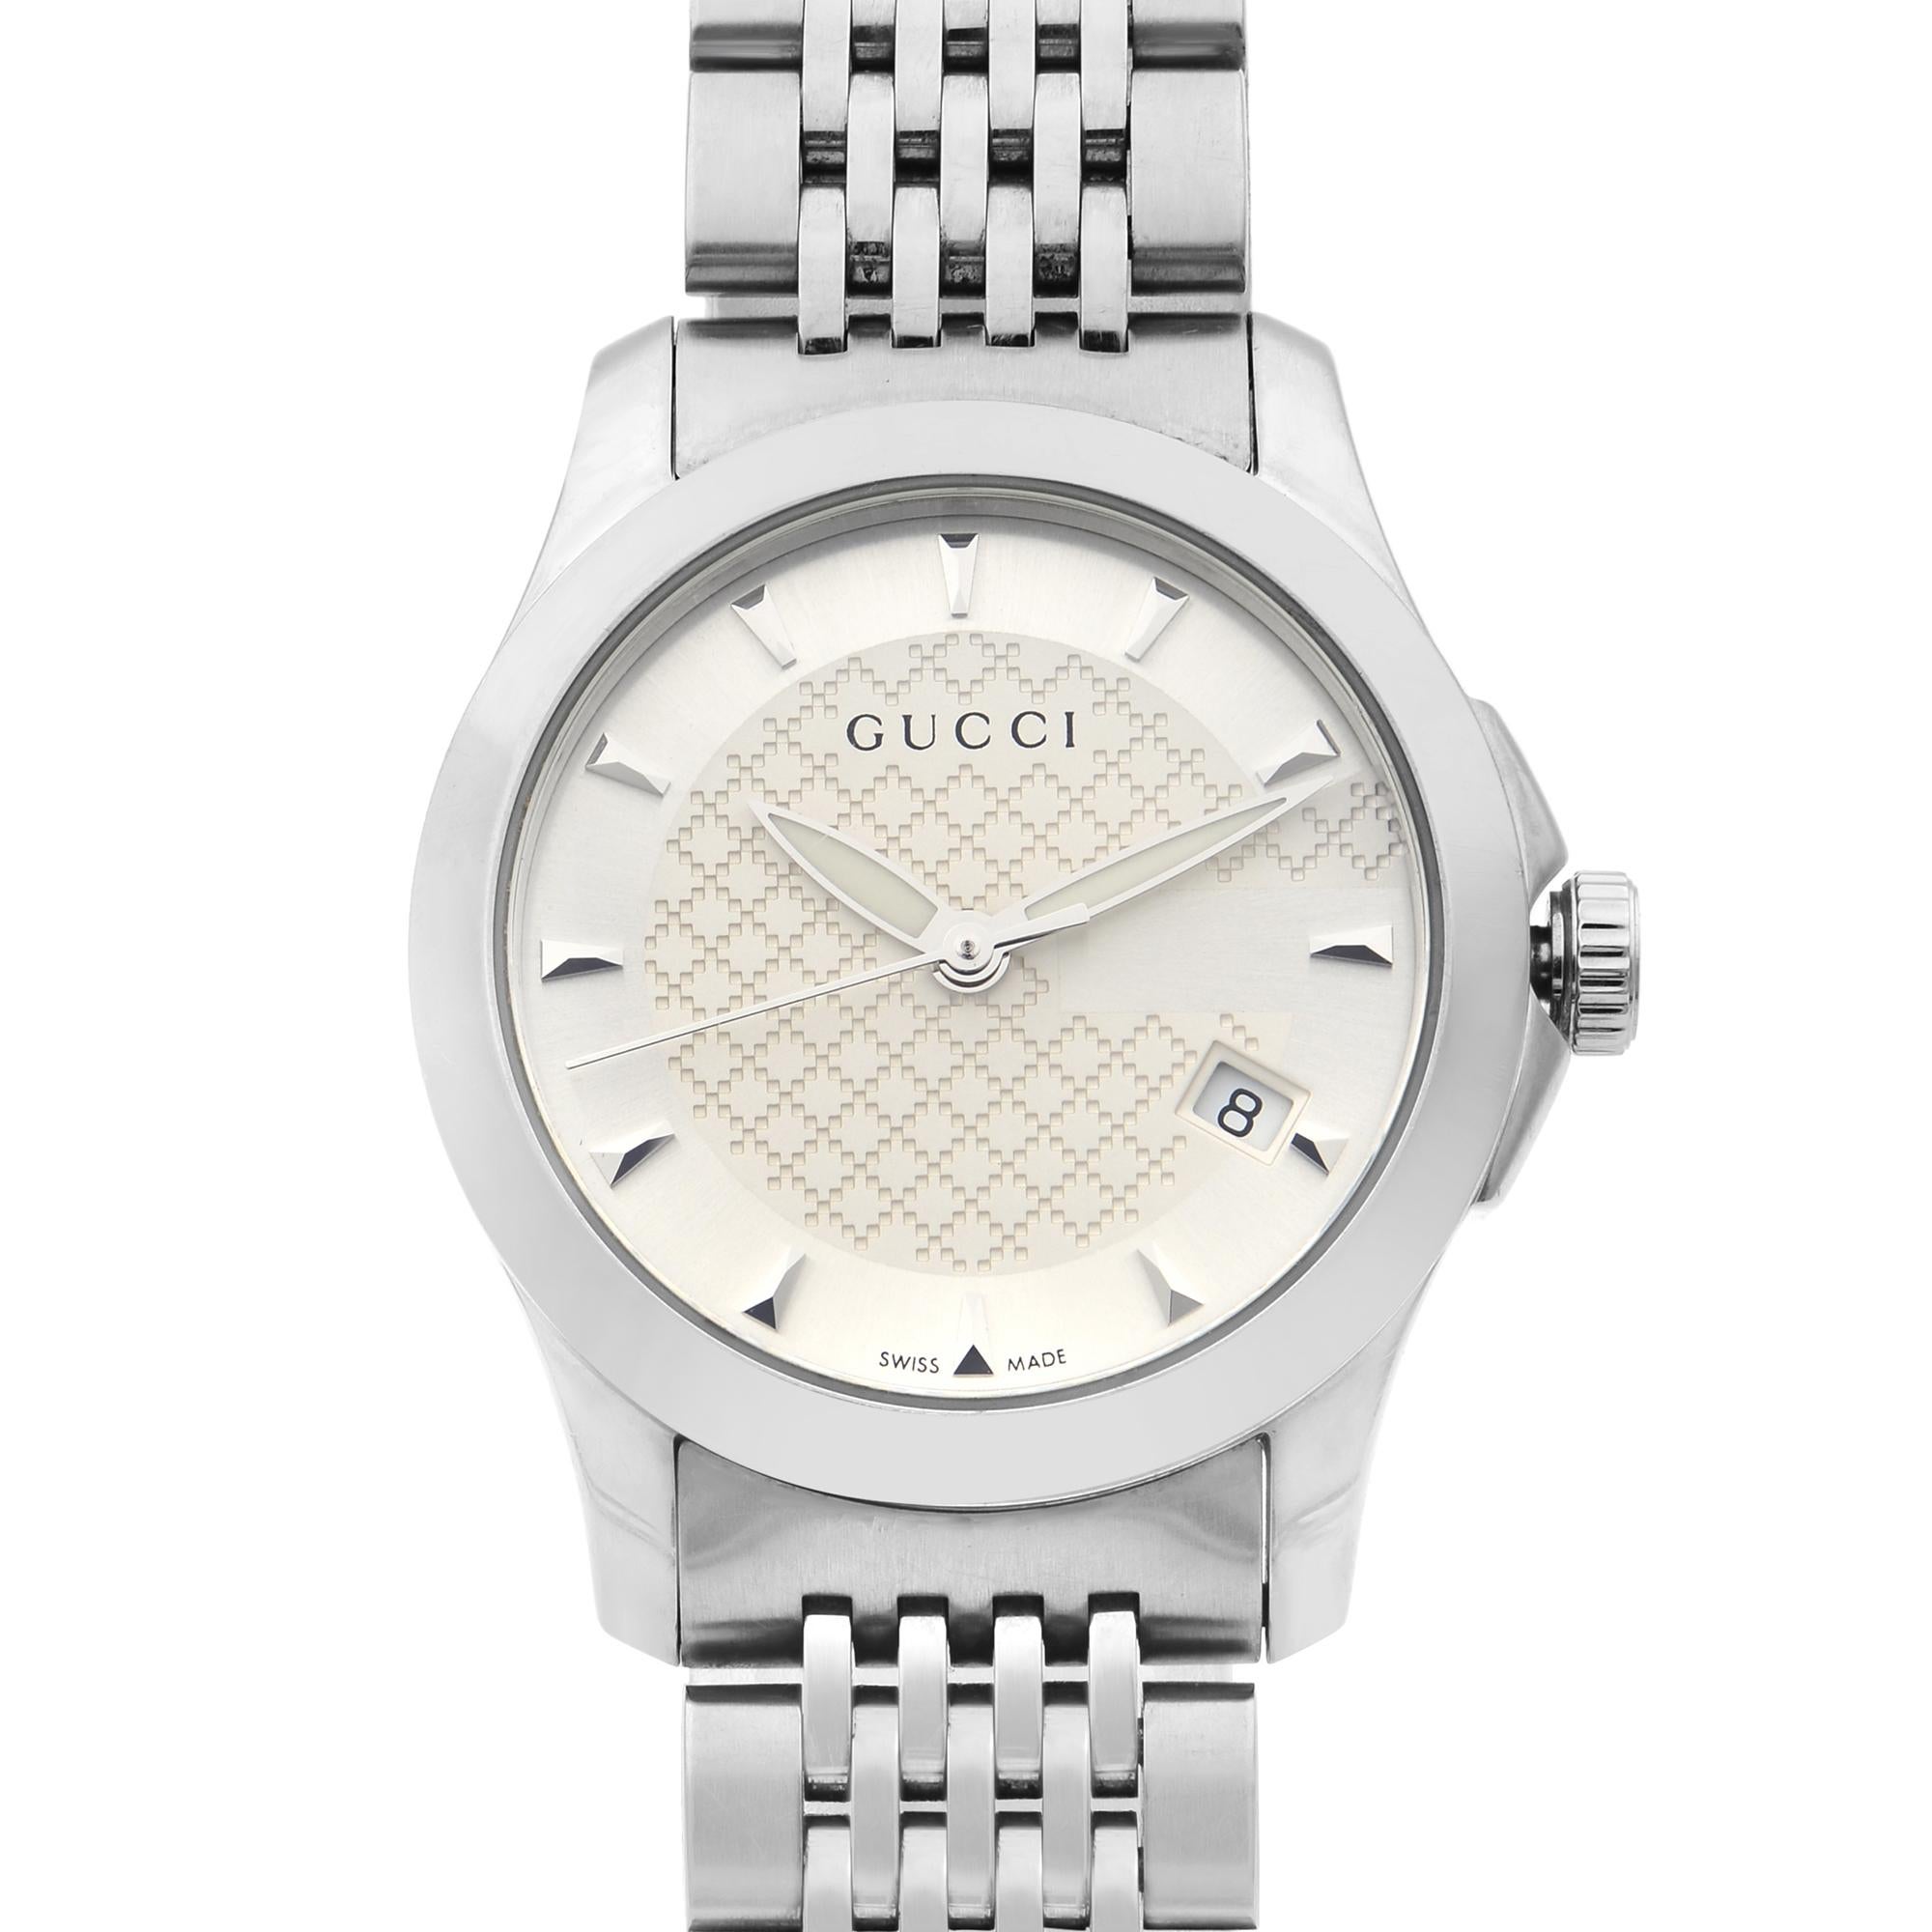 This display model Gucci G-Timeless YA126501 is a beautiful Ladie's timepiece that is powered by quartz (battery) movement which is cased in a stainless steel case. It has a round shape face, date indicator dial and has hand sticks style markers. It